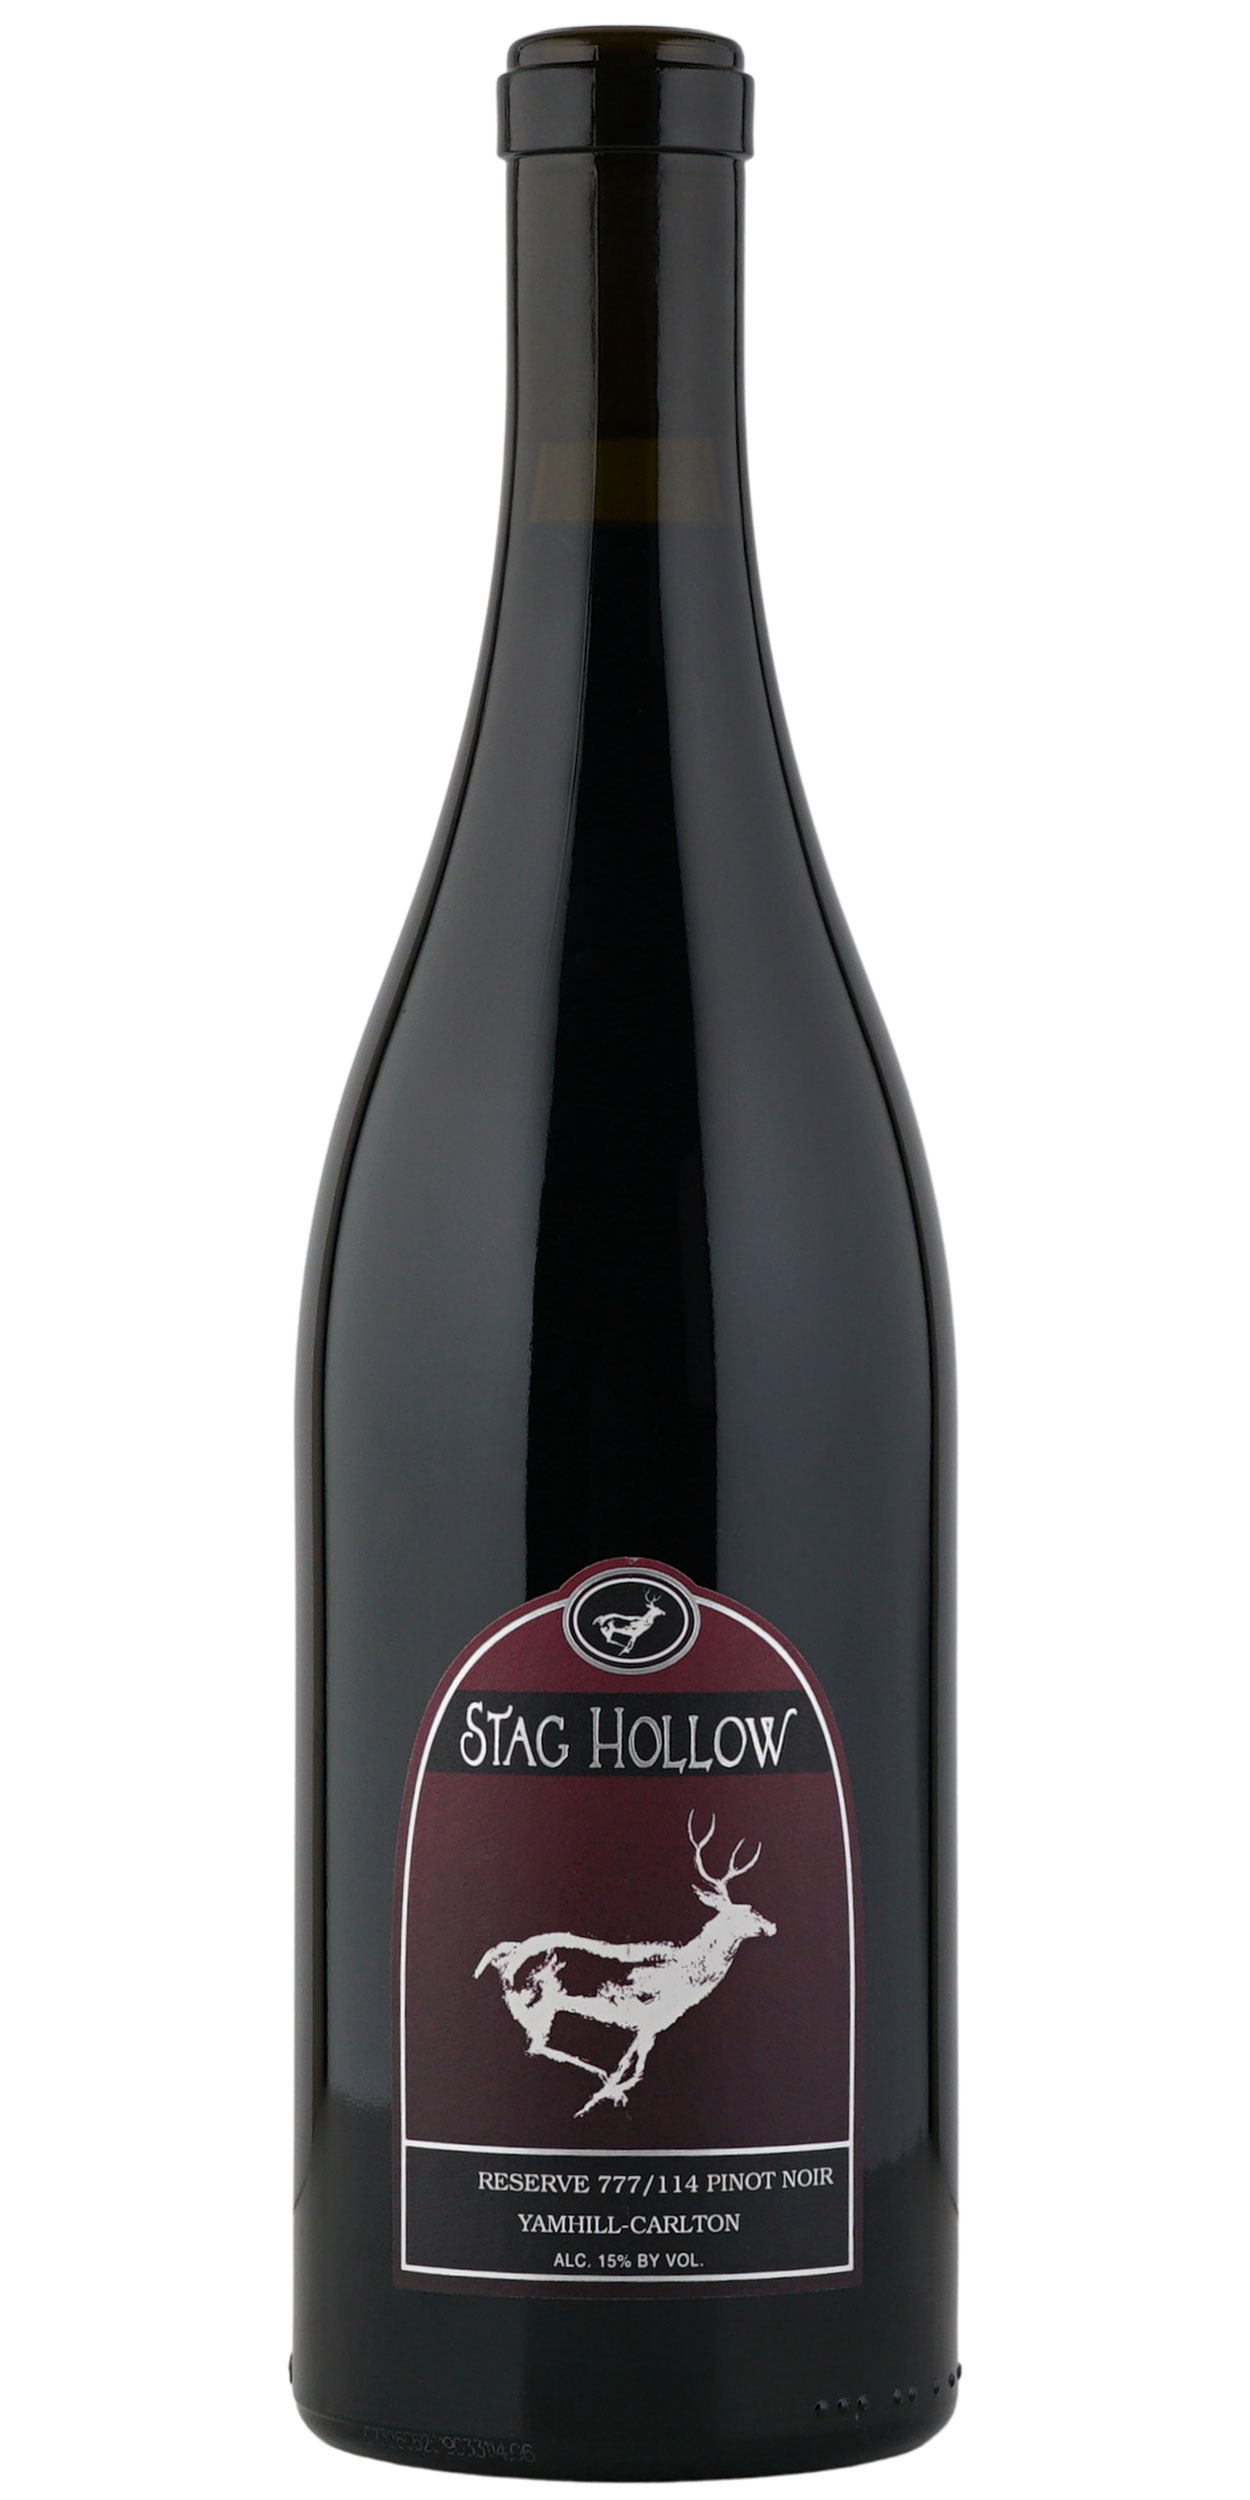 Bottle of Stag Hollow Reserve Pinot Noir